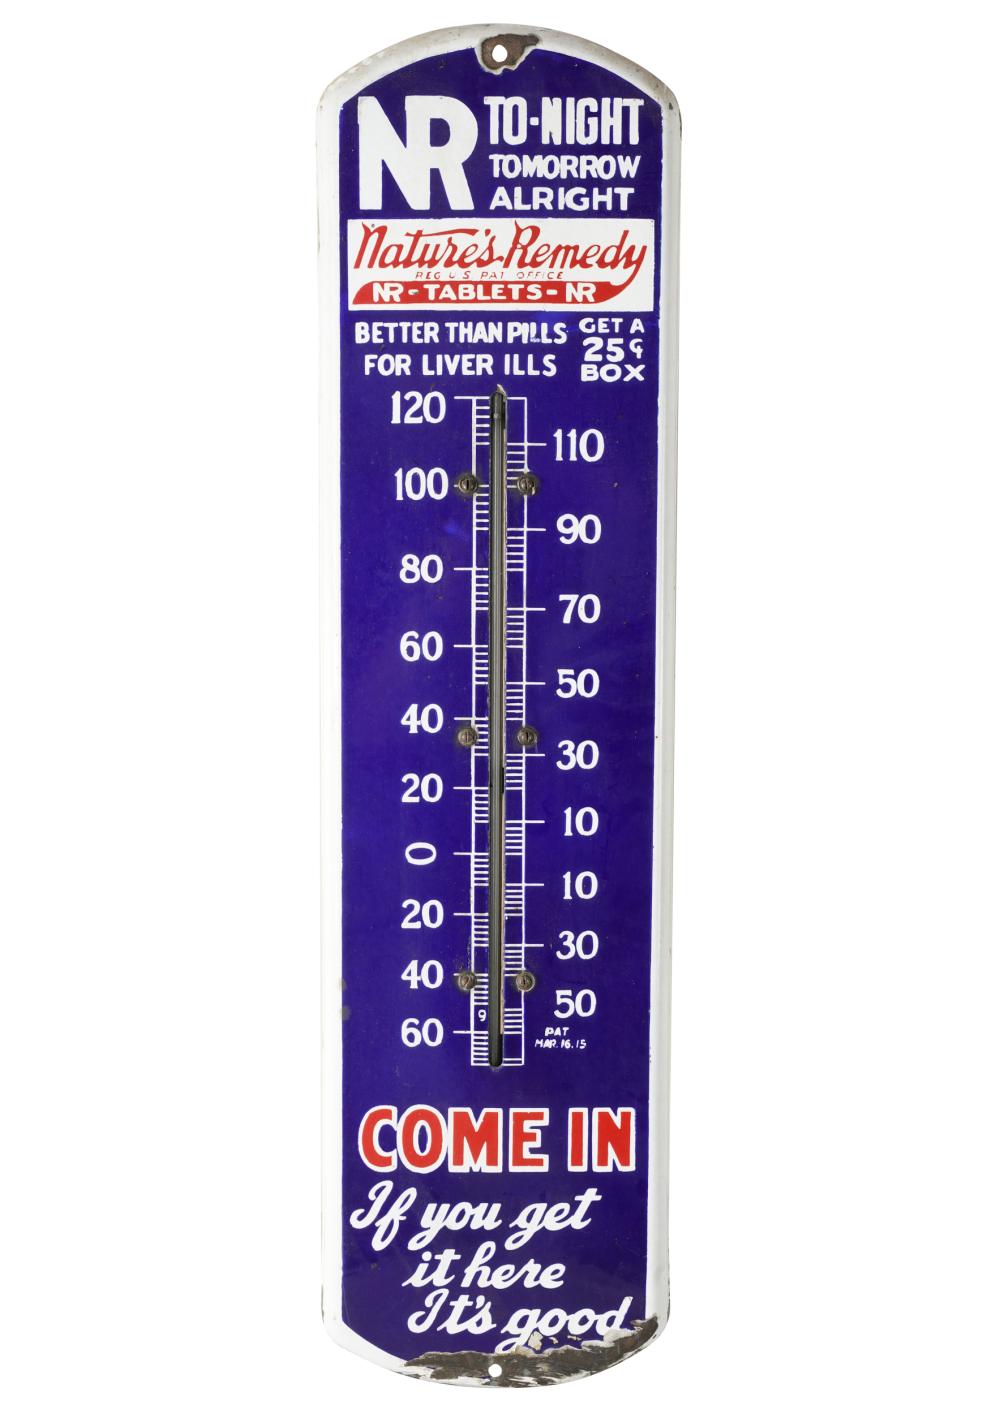 NATURES REMEDY THERMOMETER ADVERTISING 3340f7